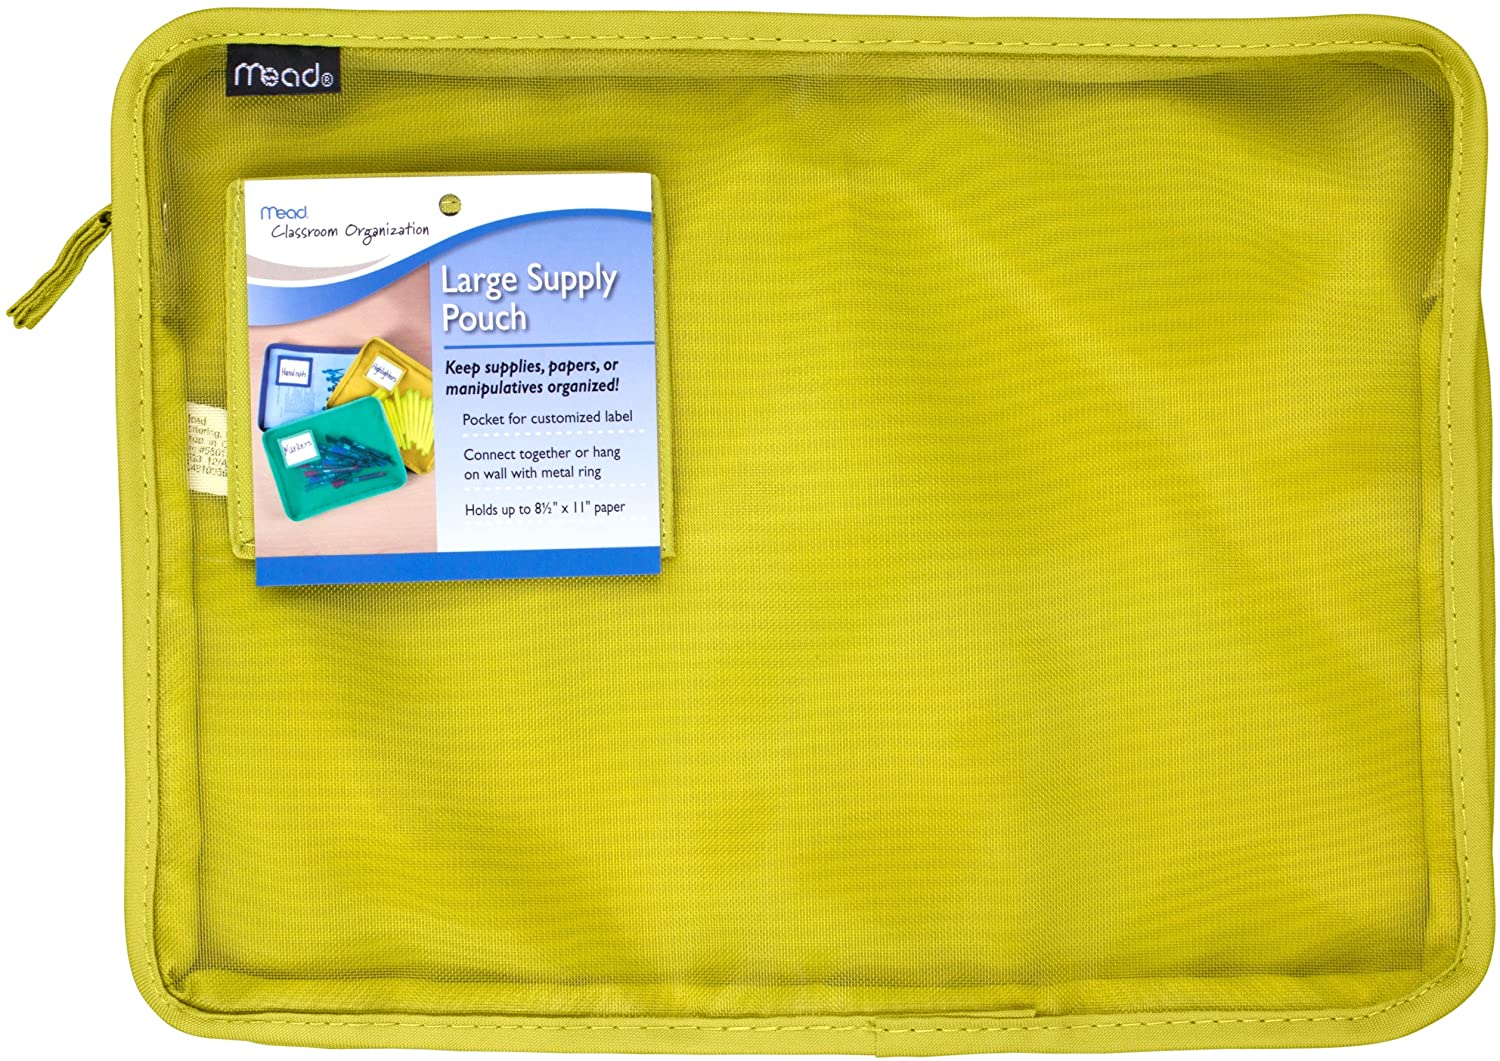 ''Mead Large SUPPLY Pouch, Green (72294)''